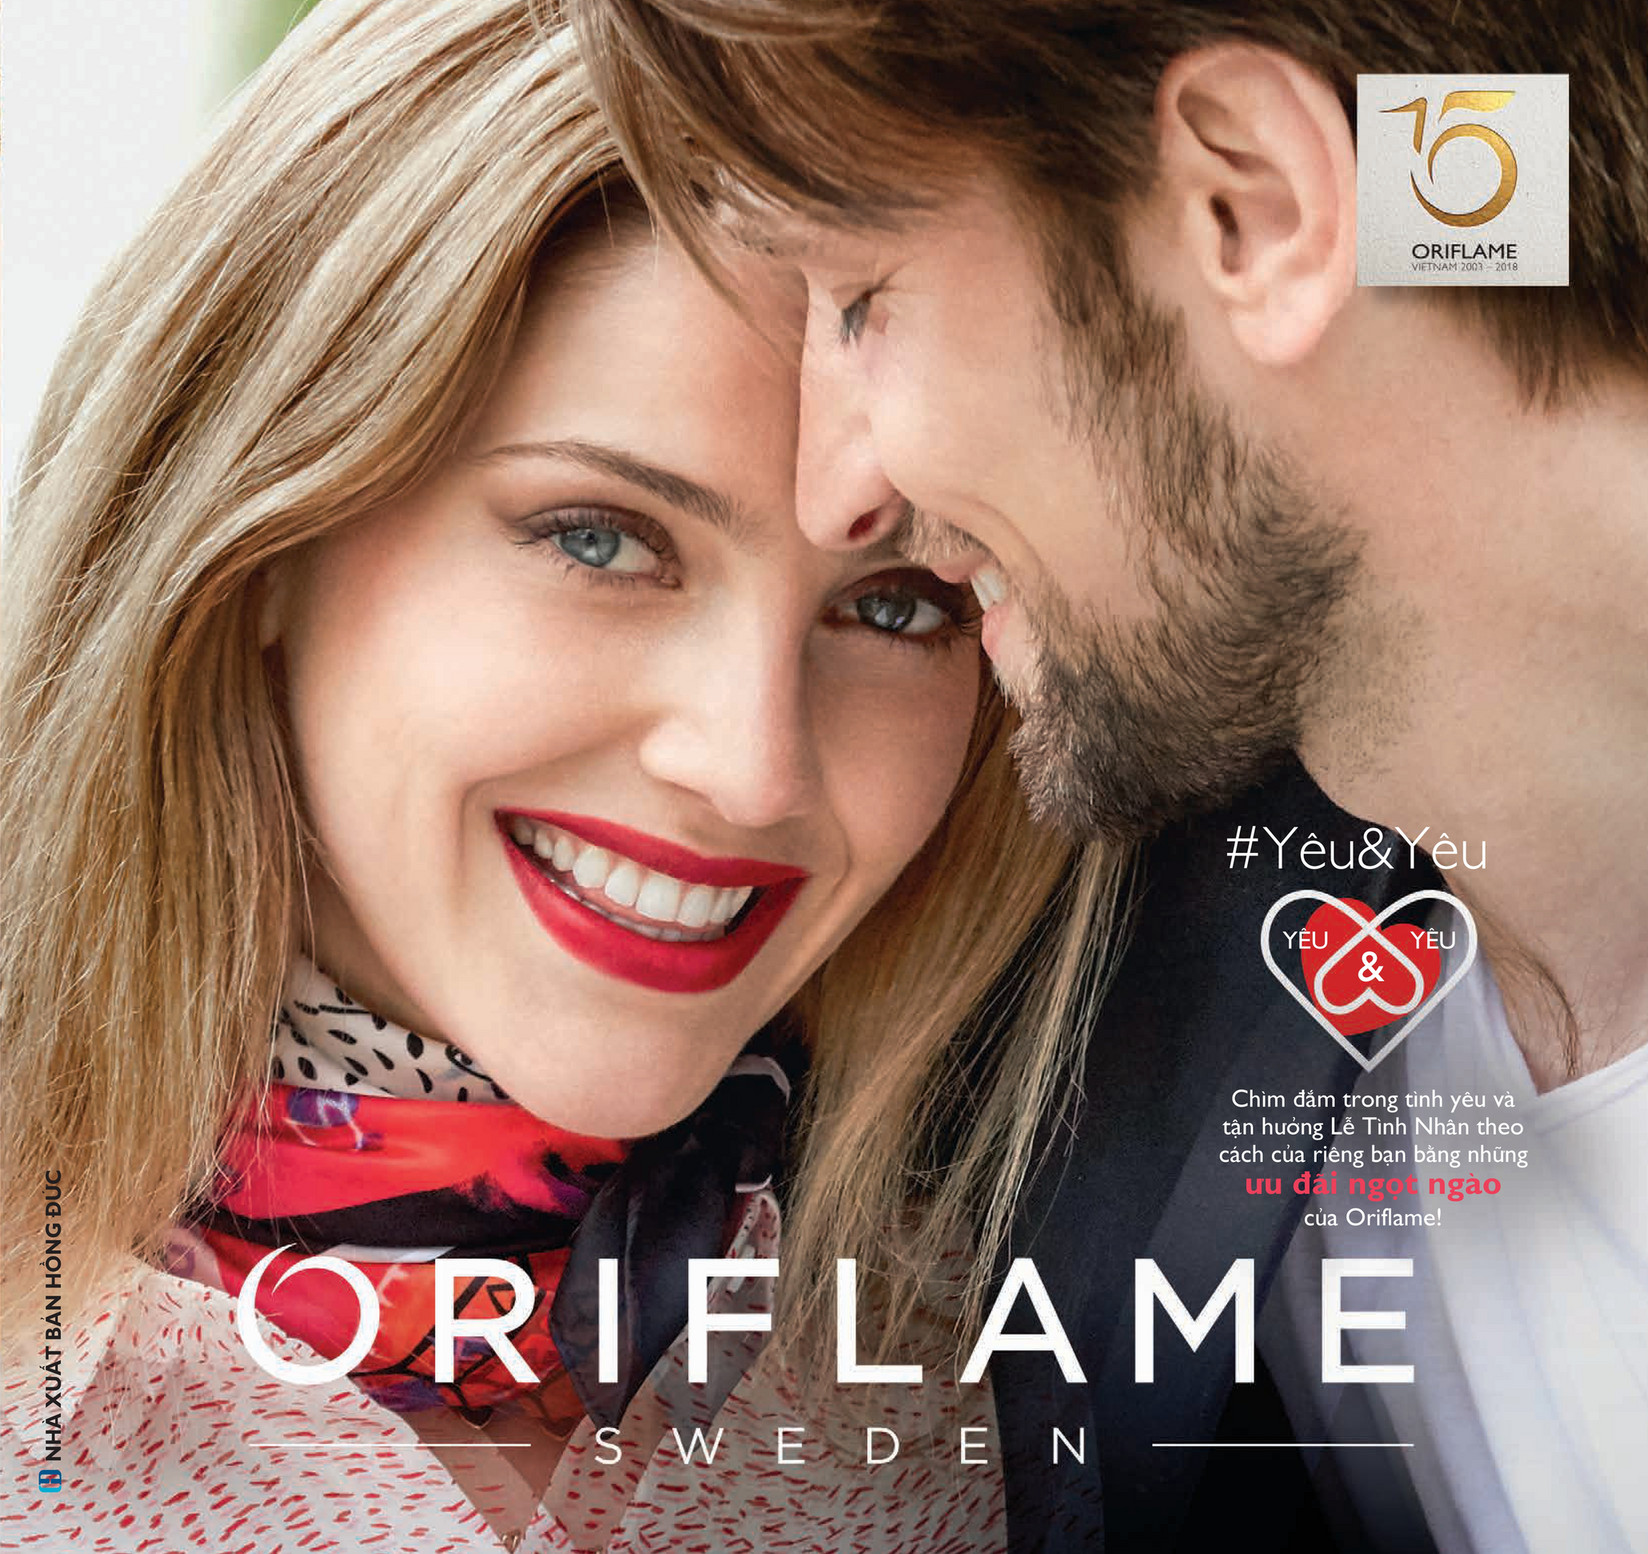 ngoc-tham-official-oriflame-02-2018-nguyen-tri-page-1-created